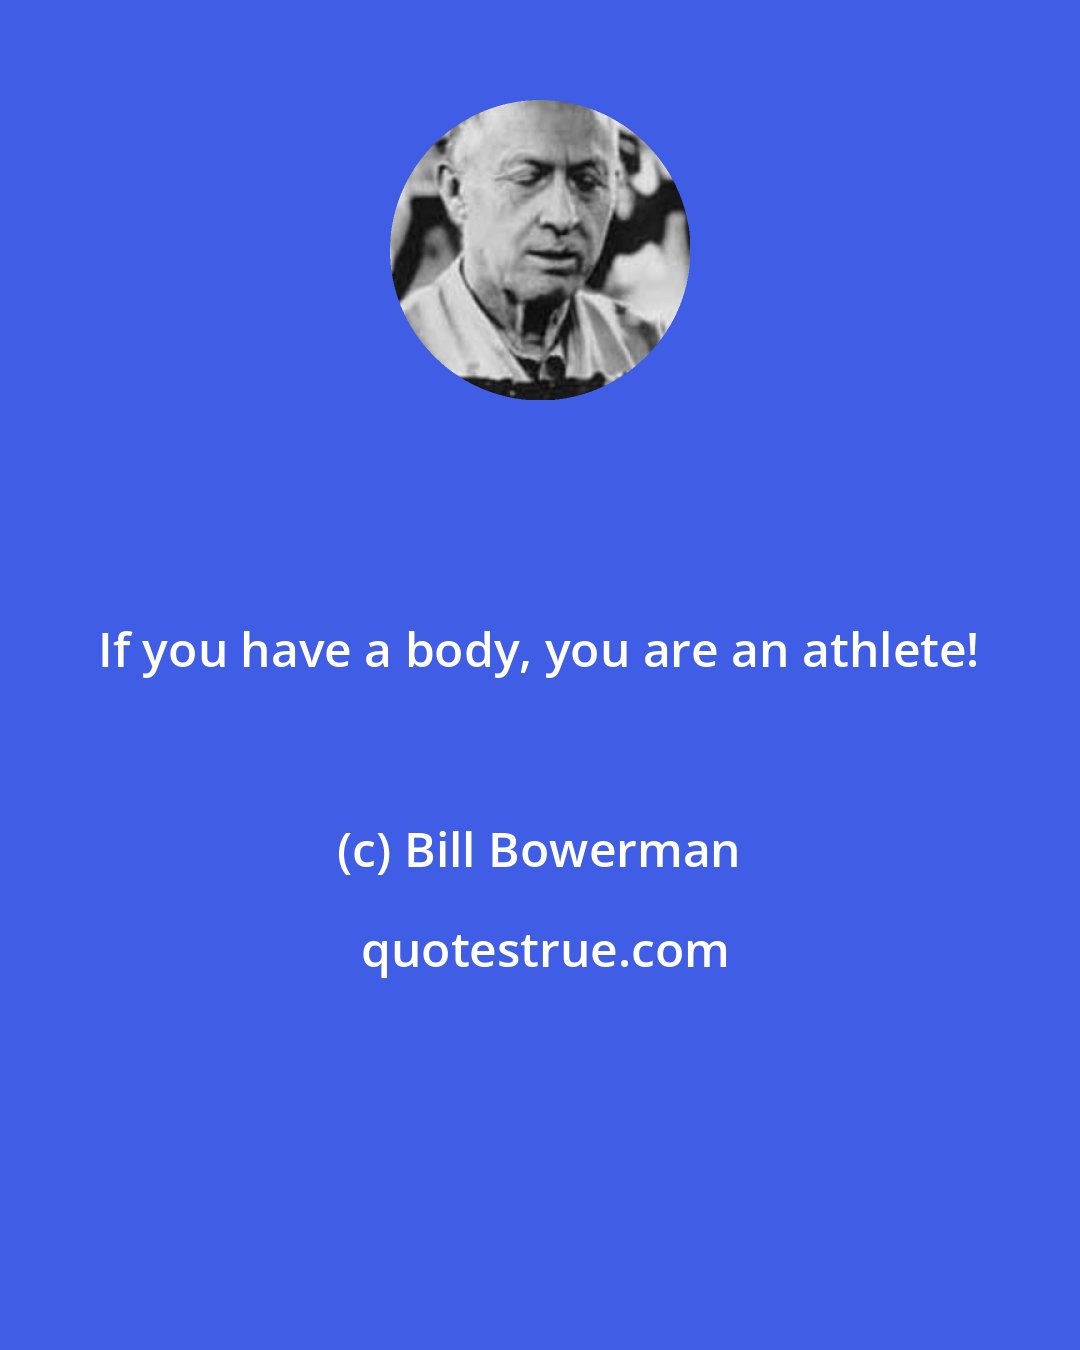 Bill Bowerman: If you have a body, you are an athlete!